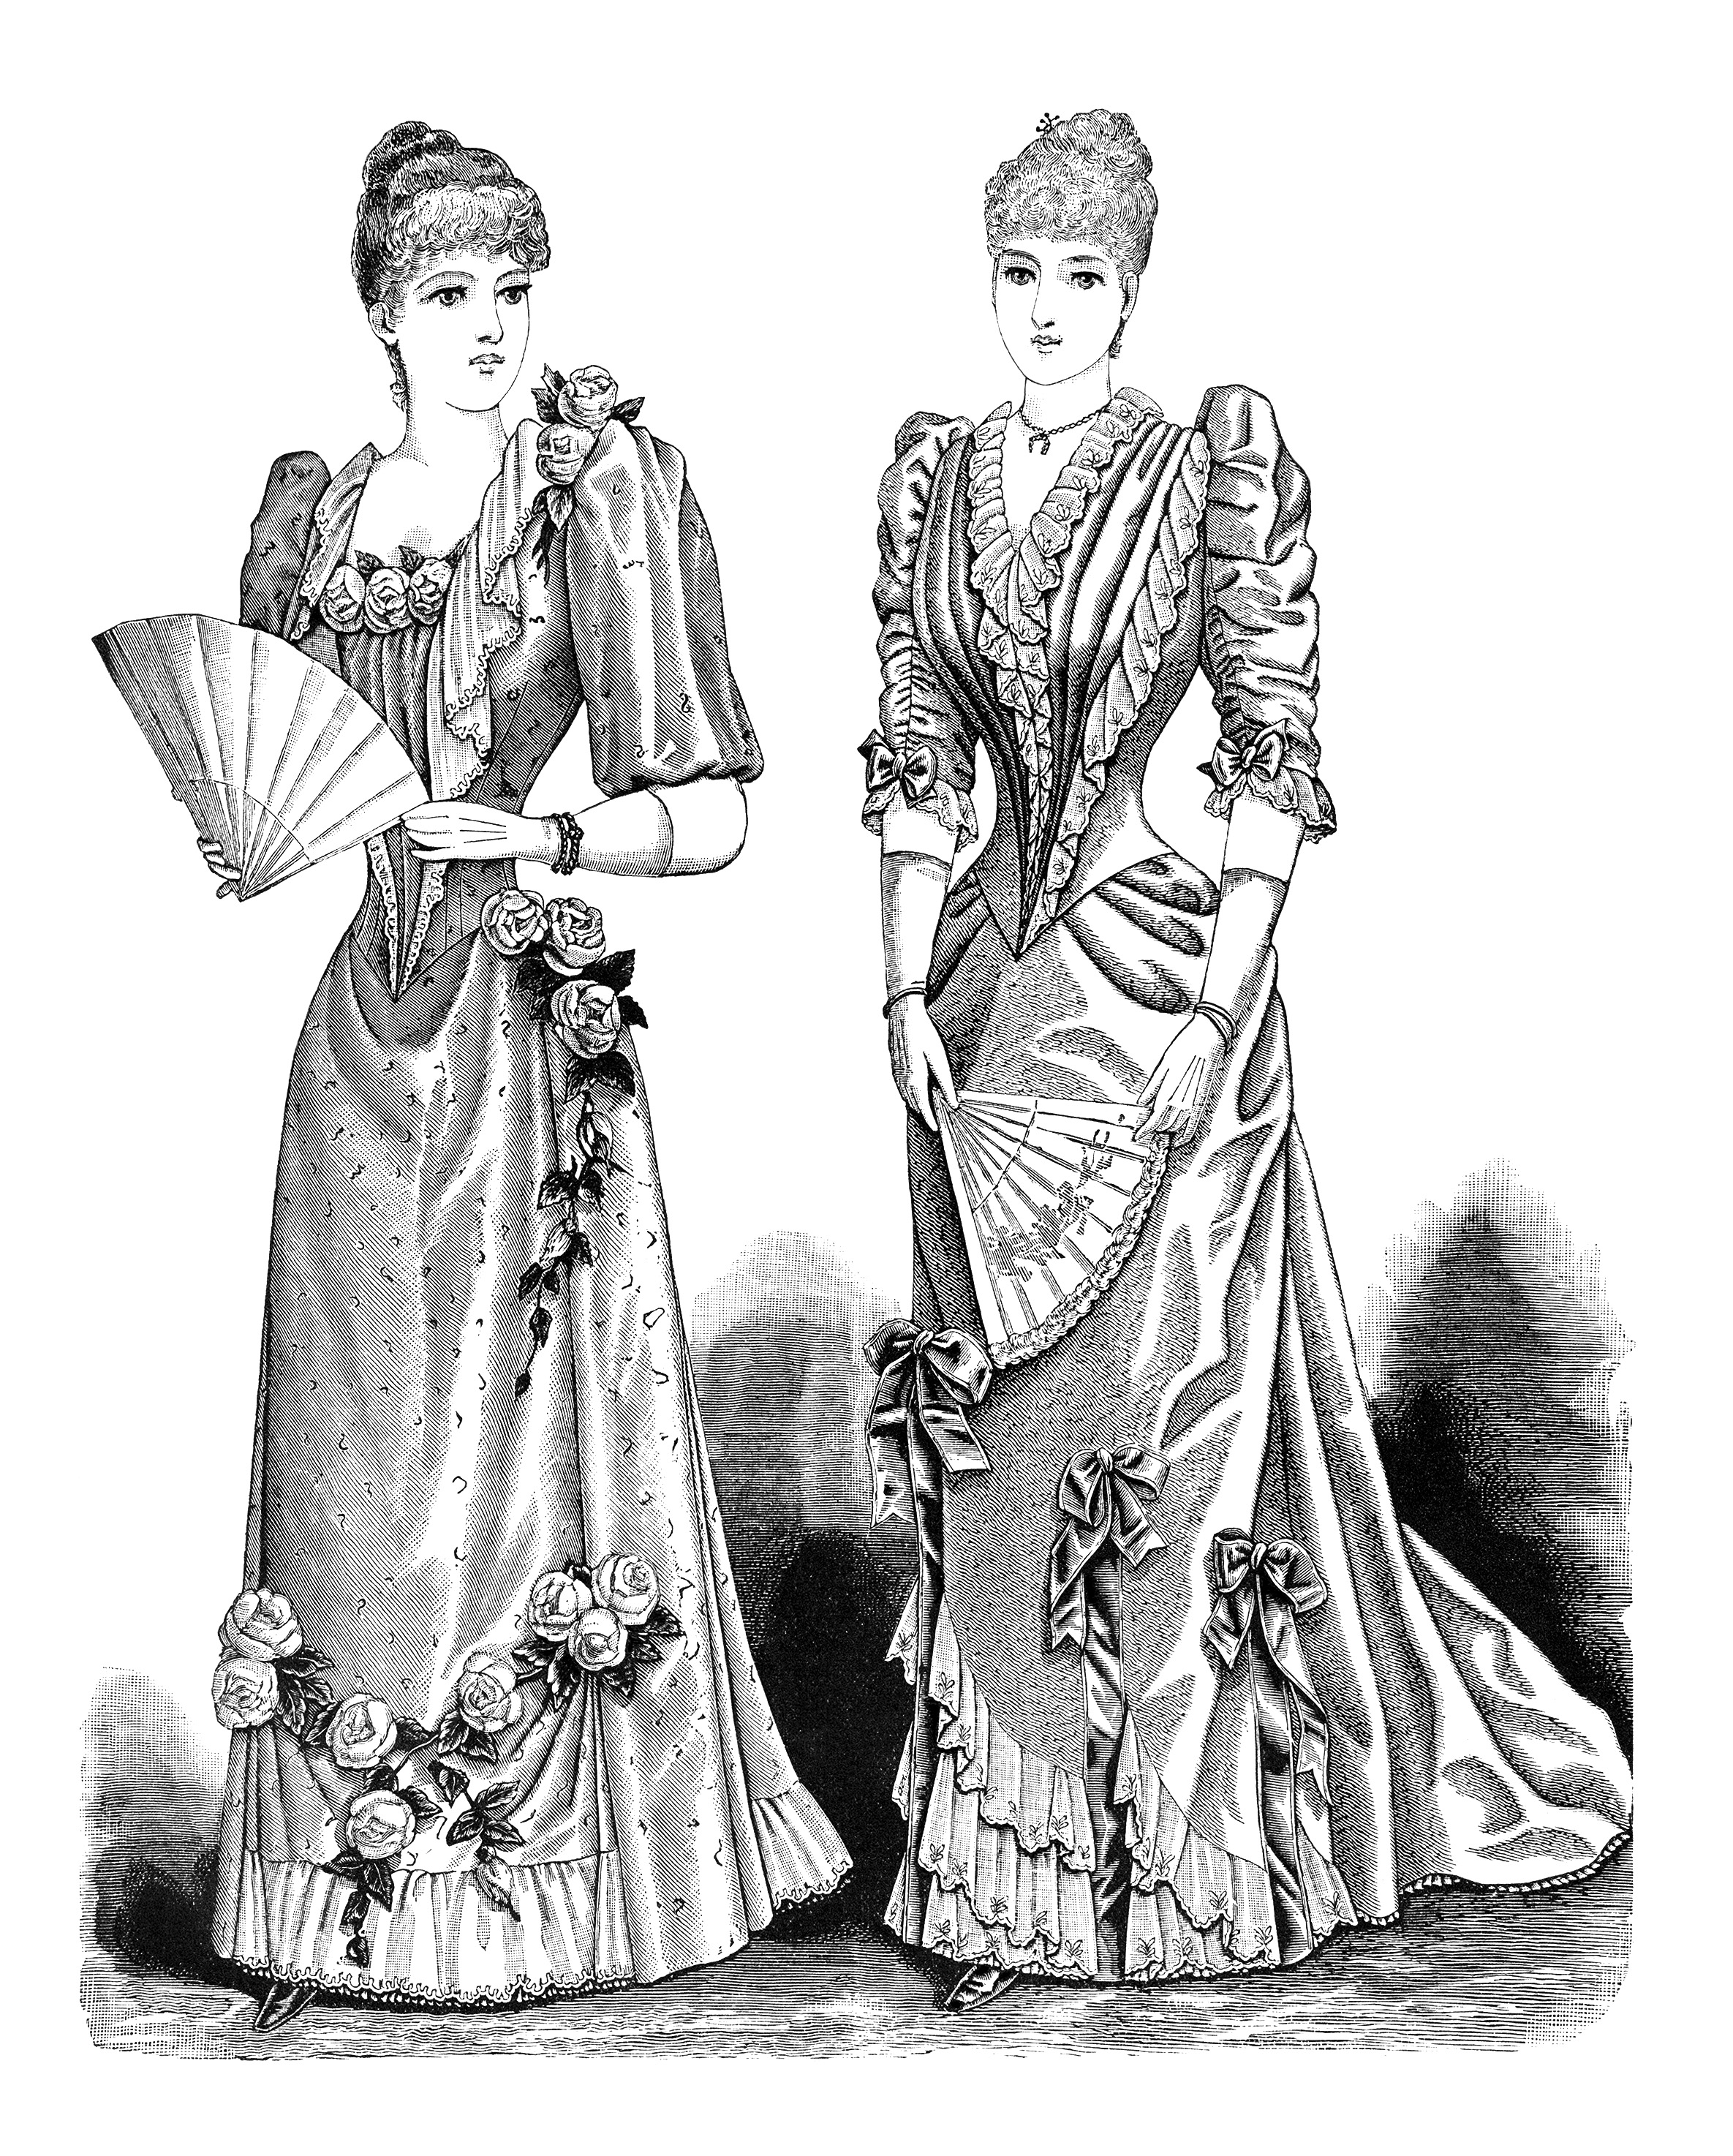 victorian lady clip art, antique fashion illustration, black and white vintage clipart. elegant lady printable. old fashioned woman's clothing